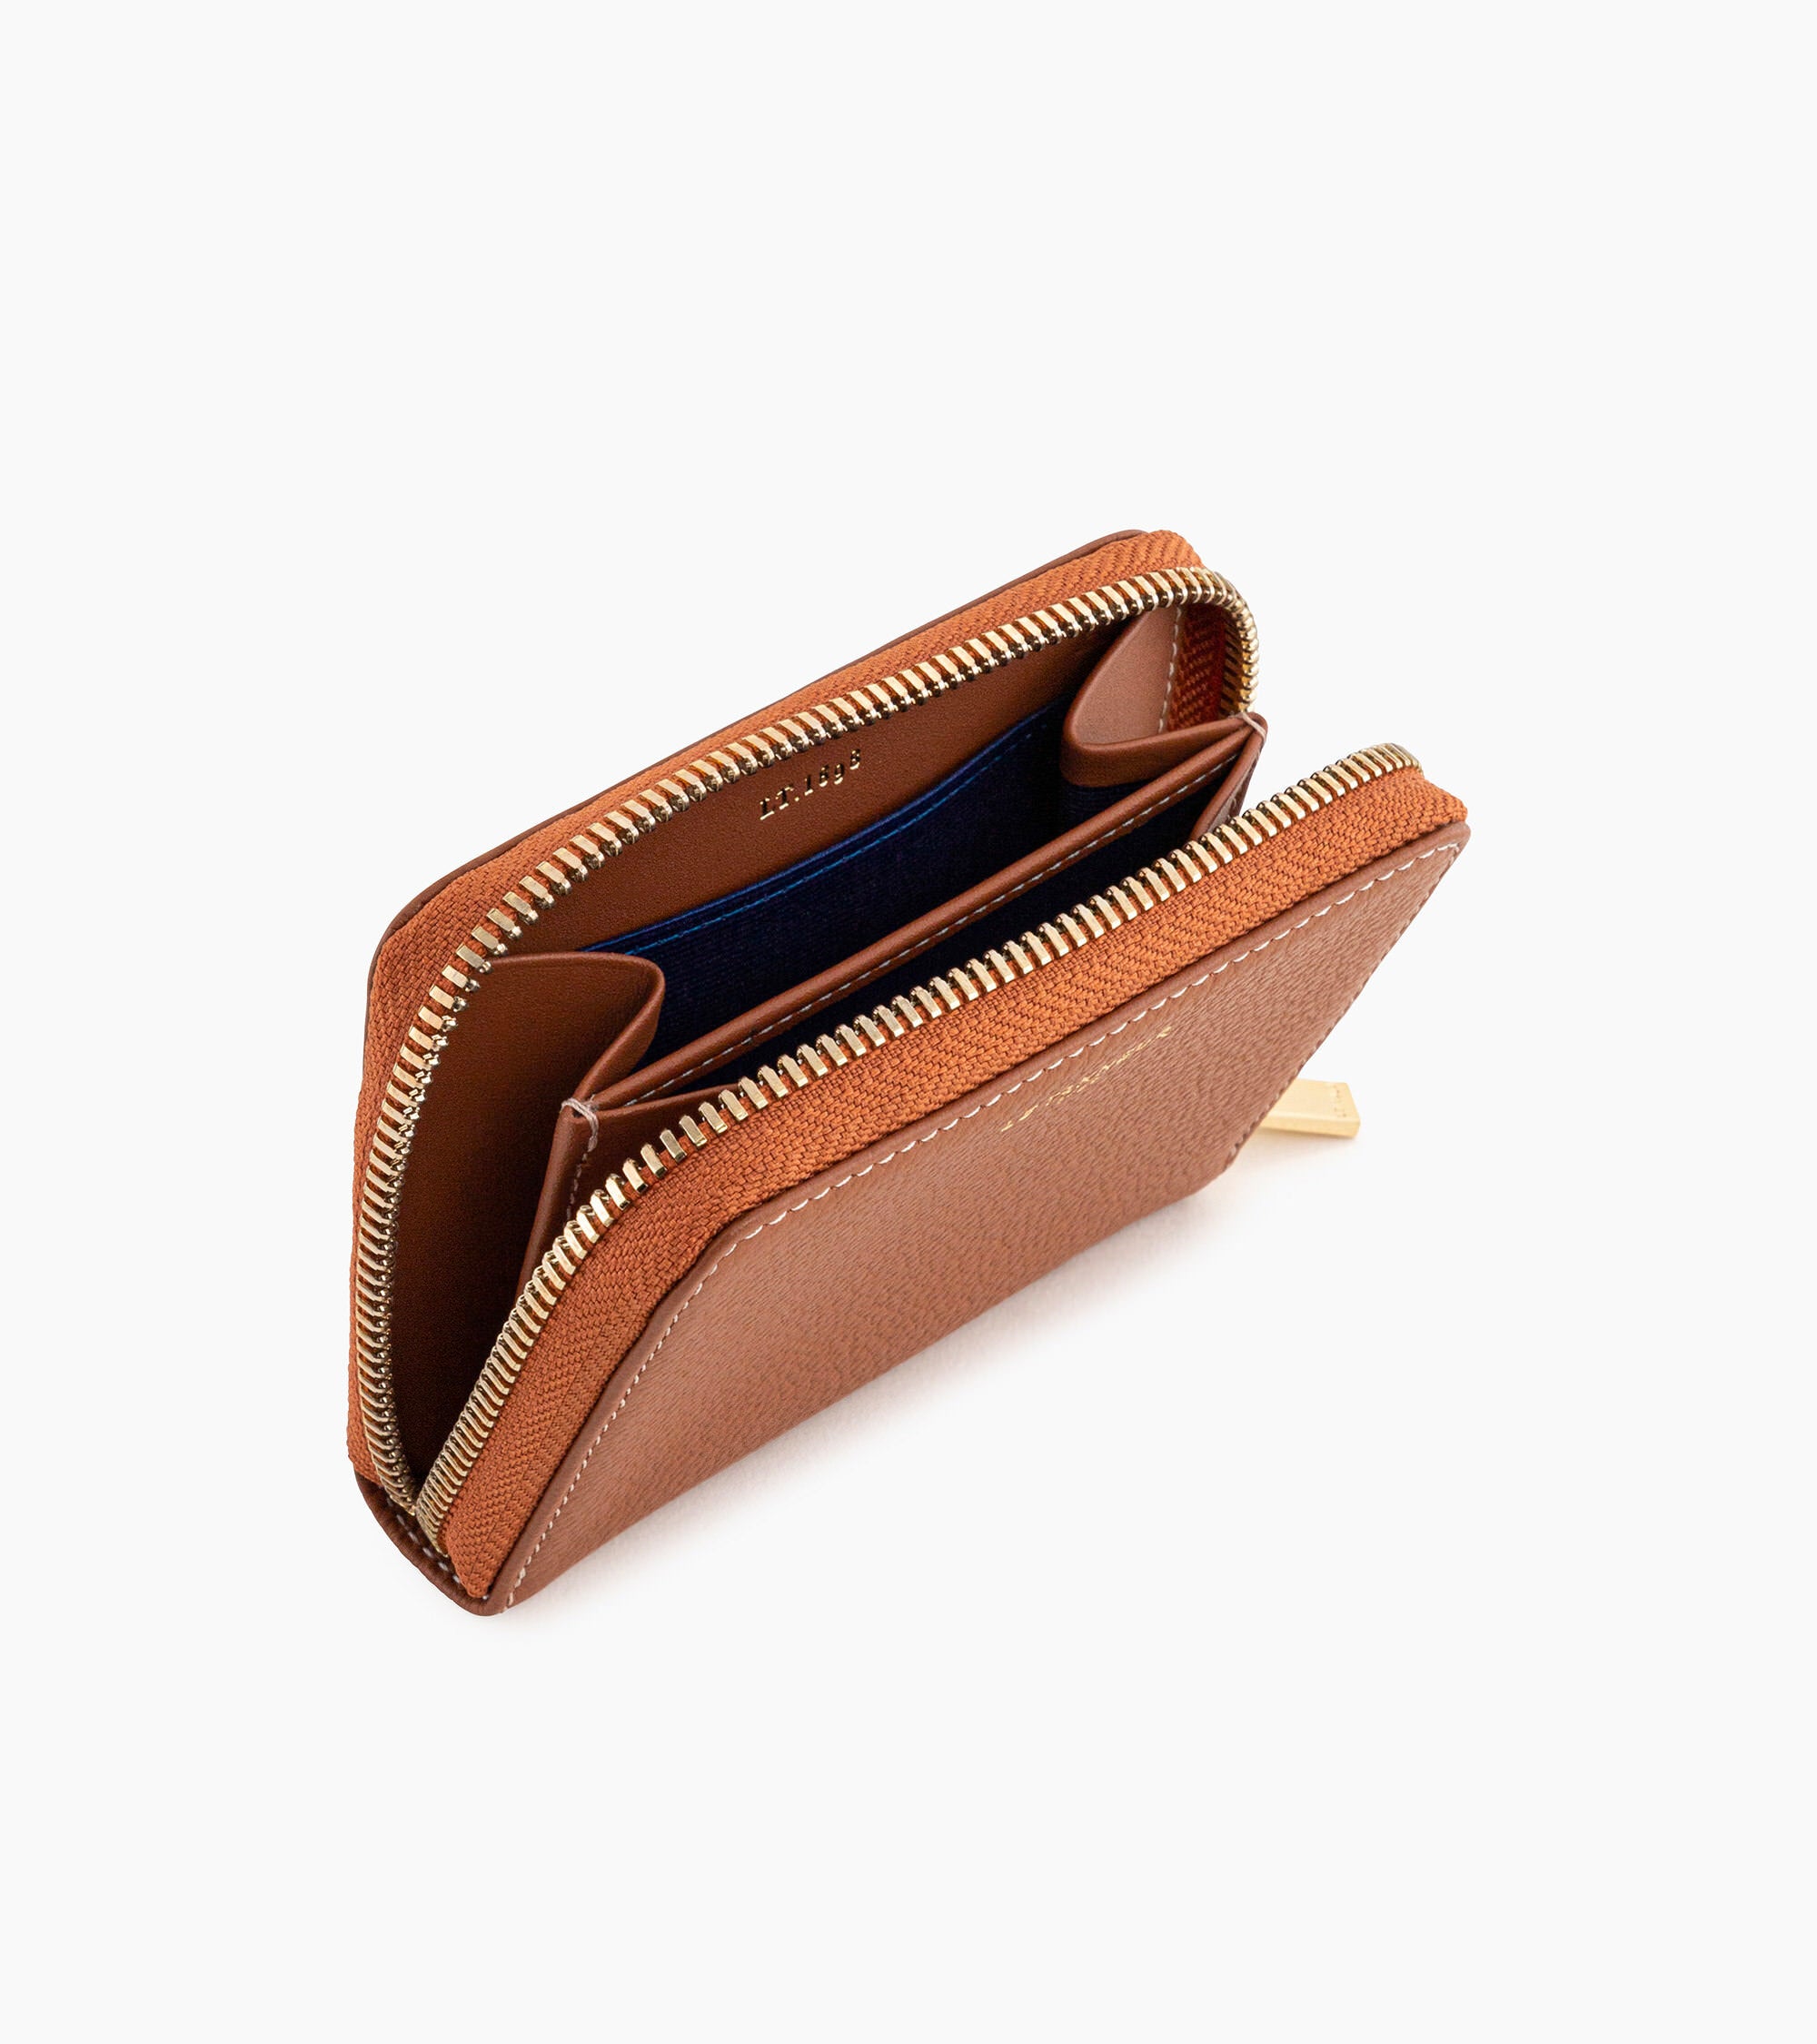 Emilie coin purse in grained leather